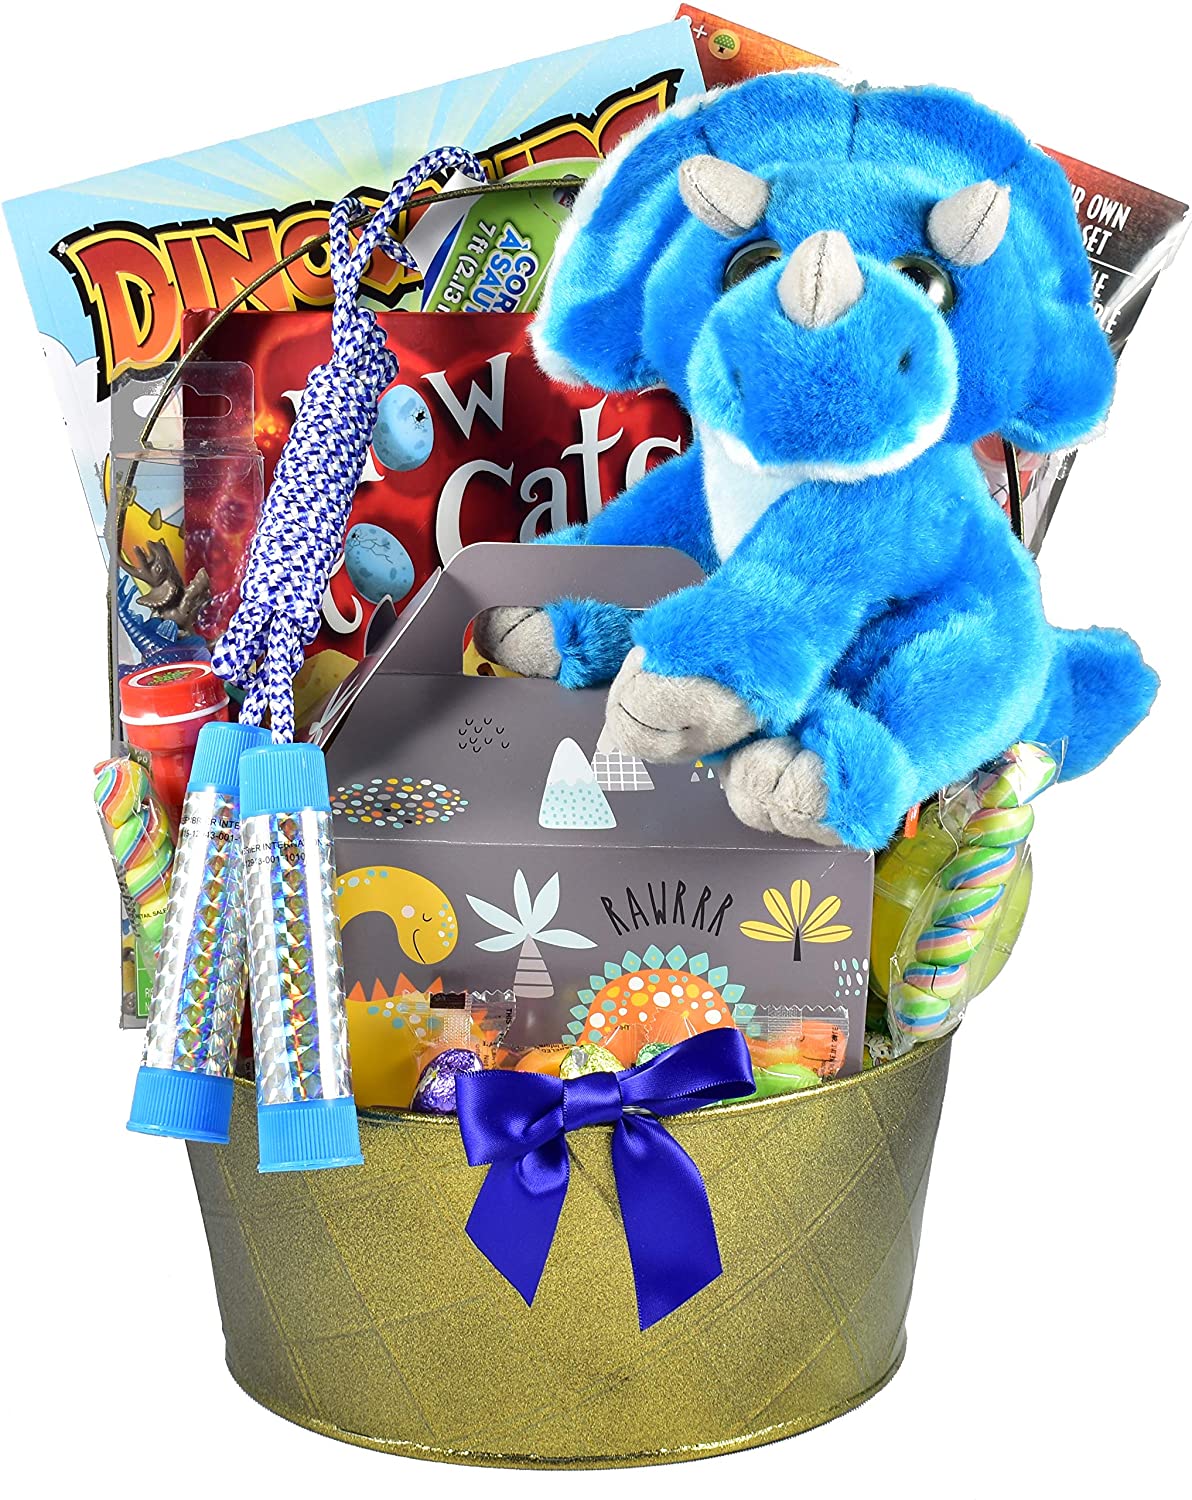 Gift Basket Village Fantastic Jurassic - Dinosaur Themed Easter Basket For Kids with Plush Dinosaur, Dino Eggs, Activity Book, Candy and More..., Milk Chocolate